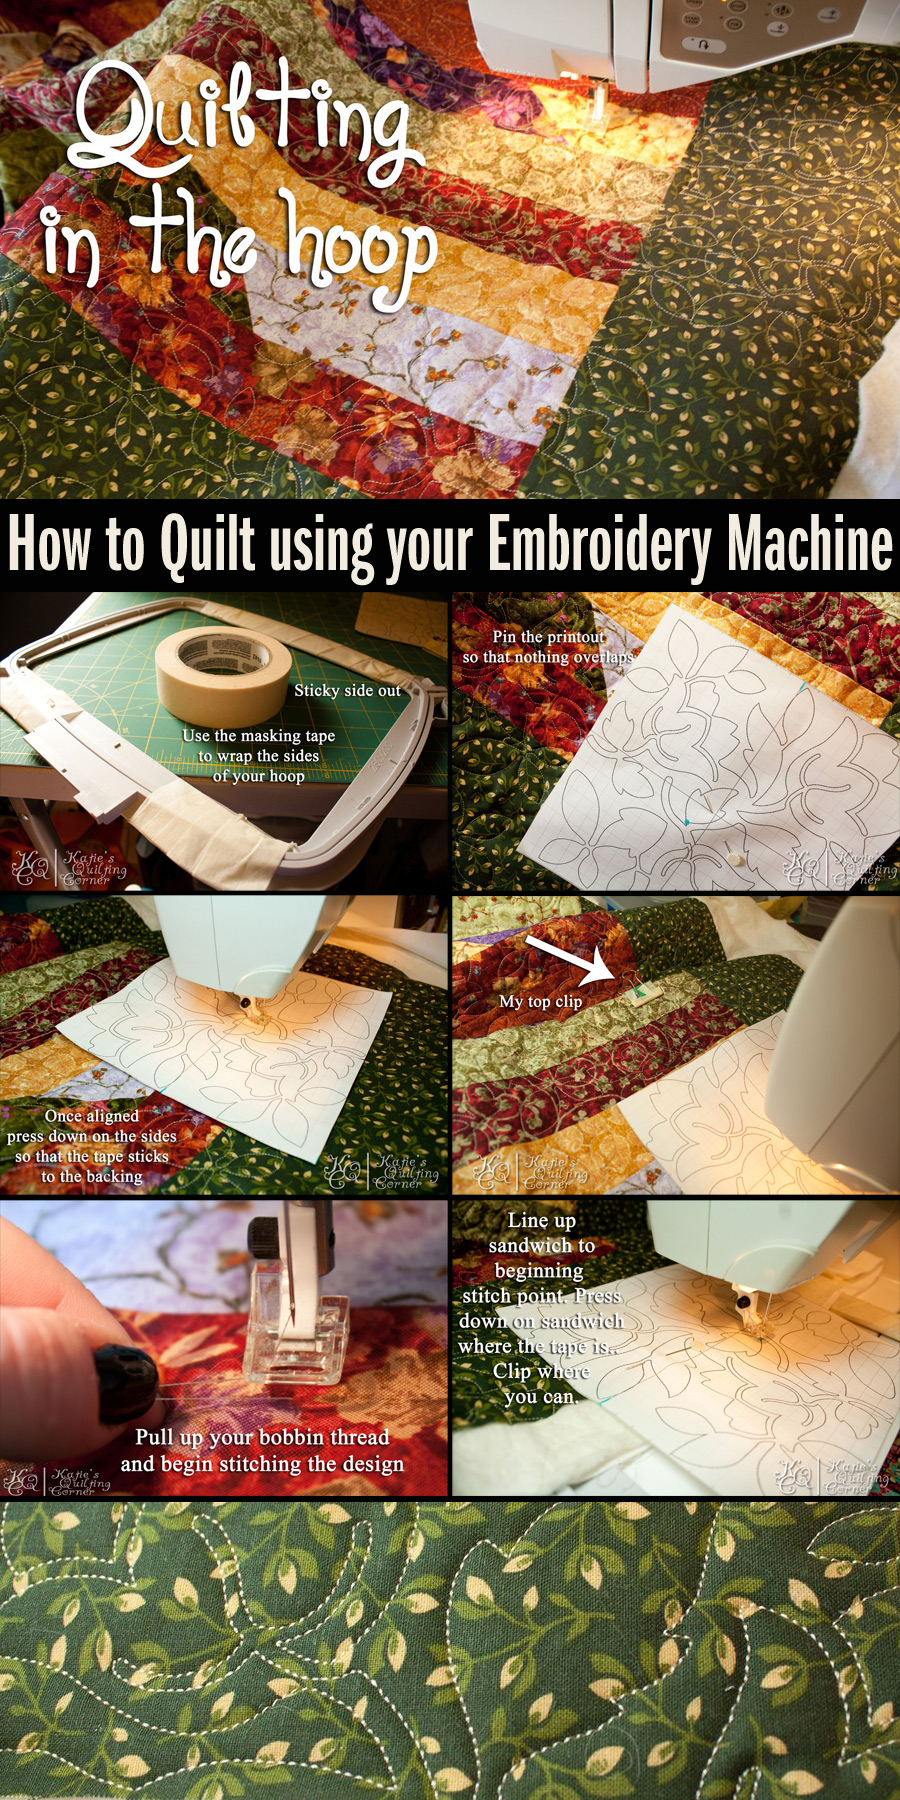 How to Quilt using your embroidery machine